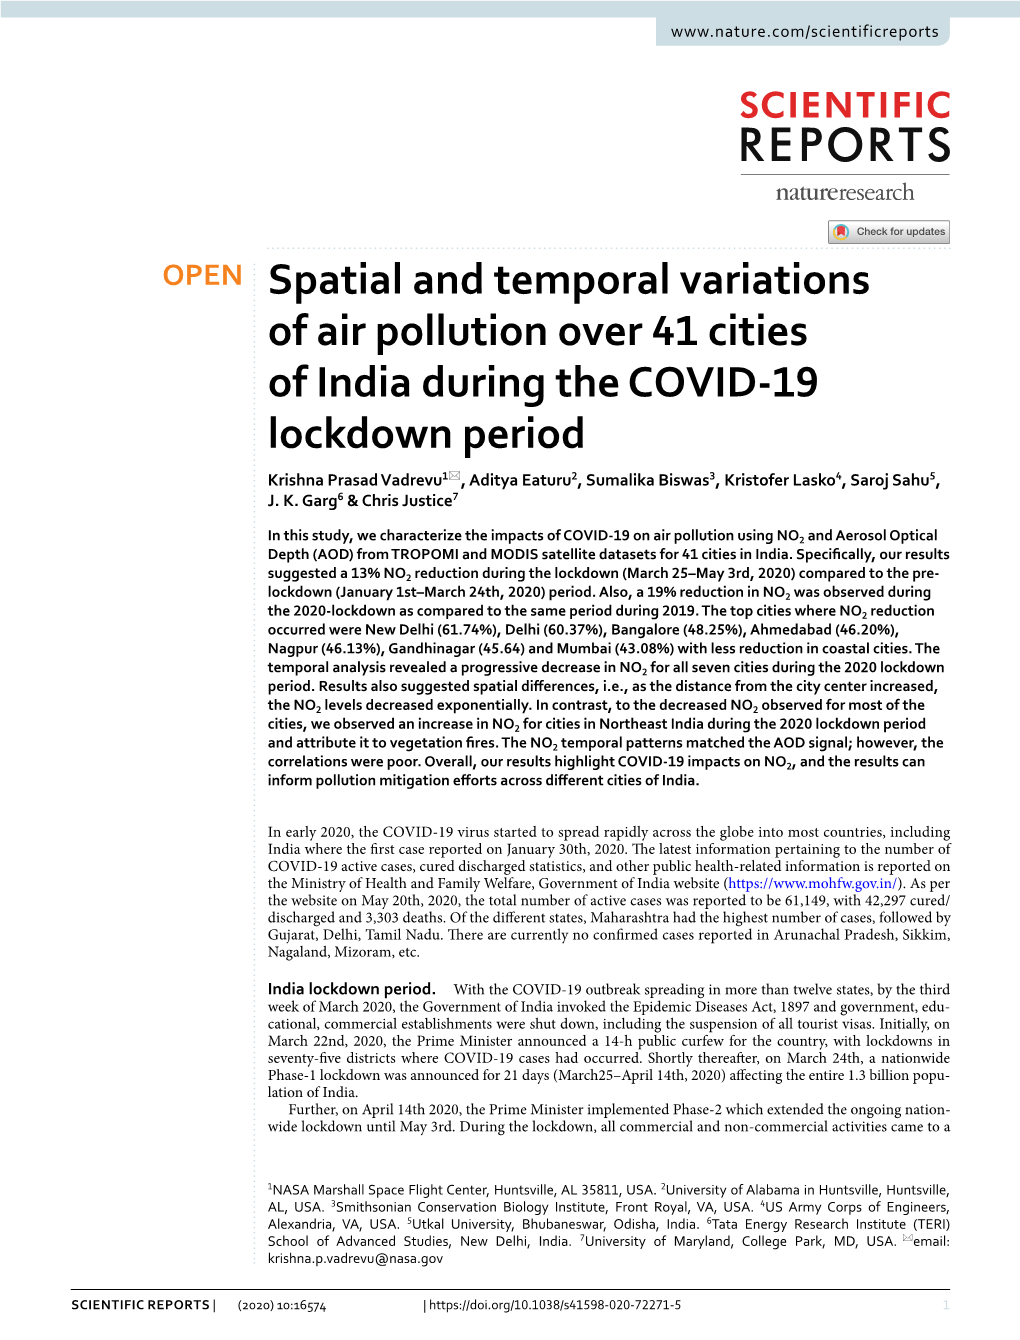 Spatial and Temporal Variations of Air Pollution Over 41 Cities of India During the COVID-19 Lockdown Period